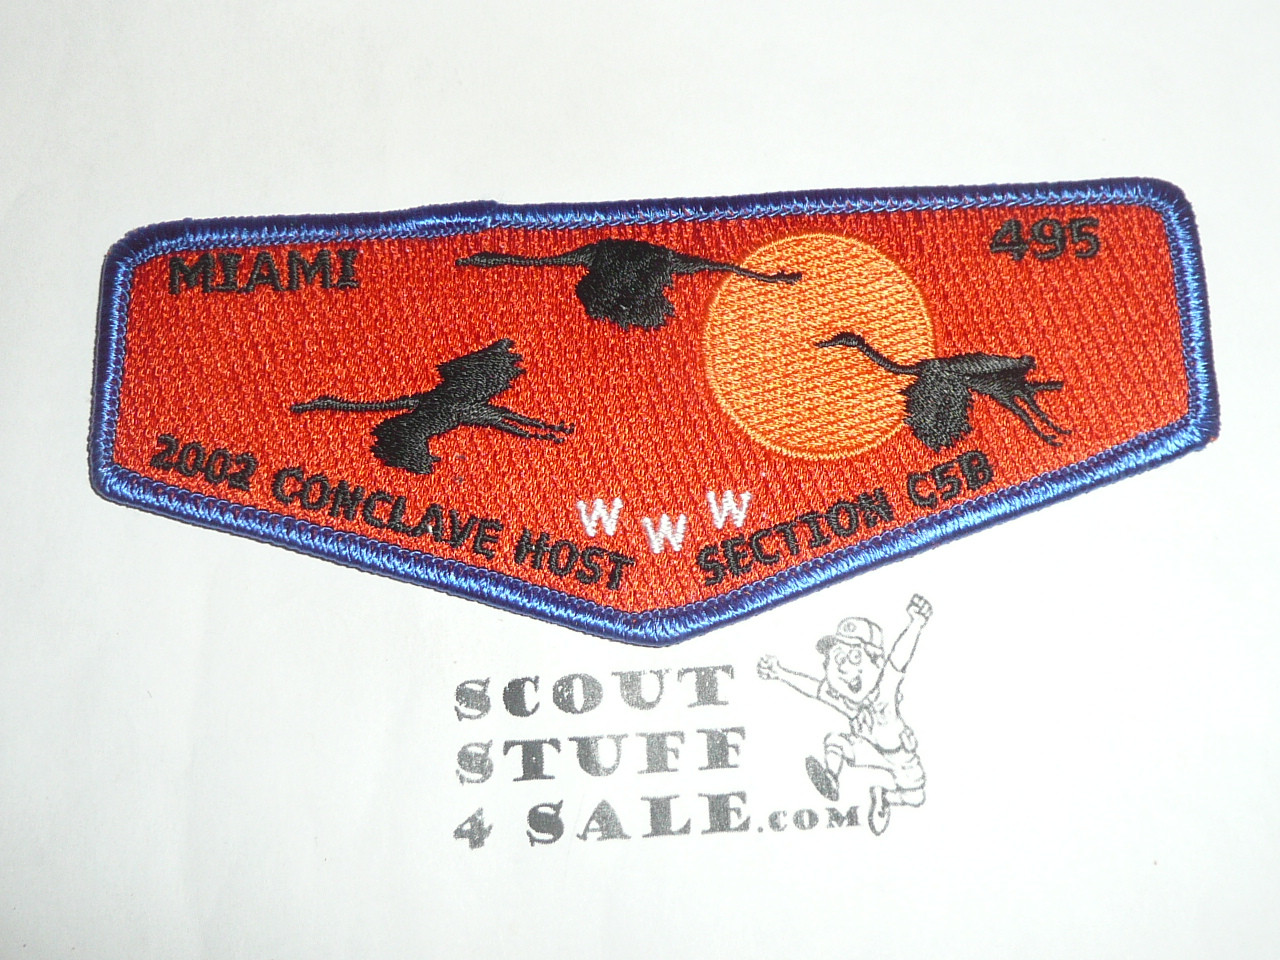 Order of the Arrow Lodge #495 Miami s34 Flap Patch